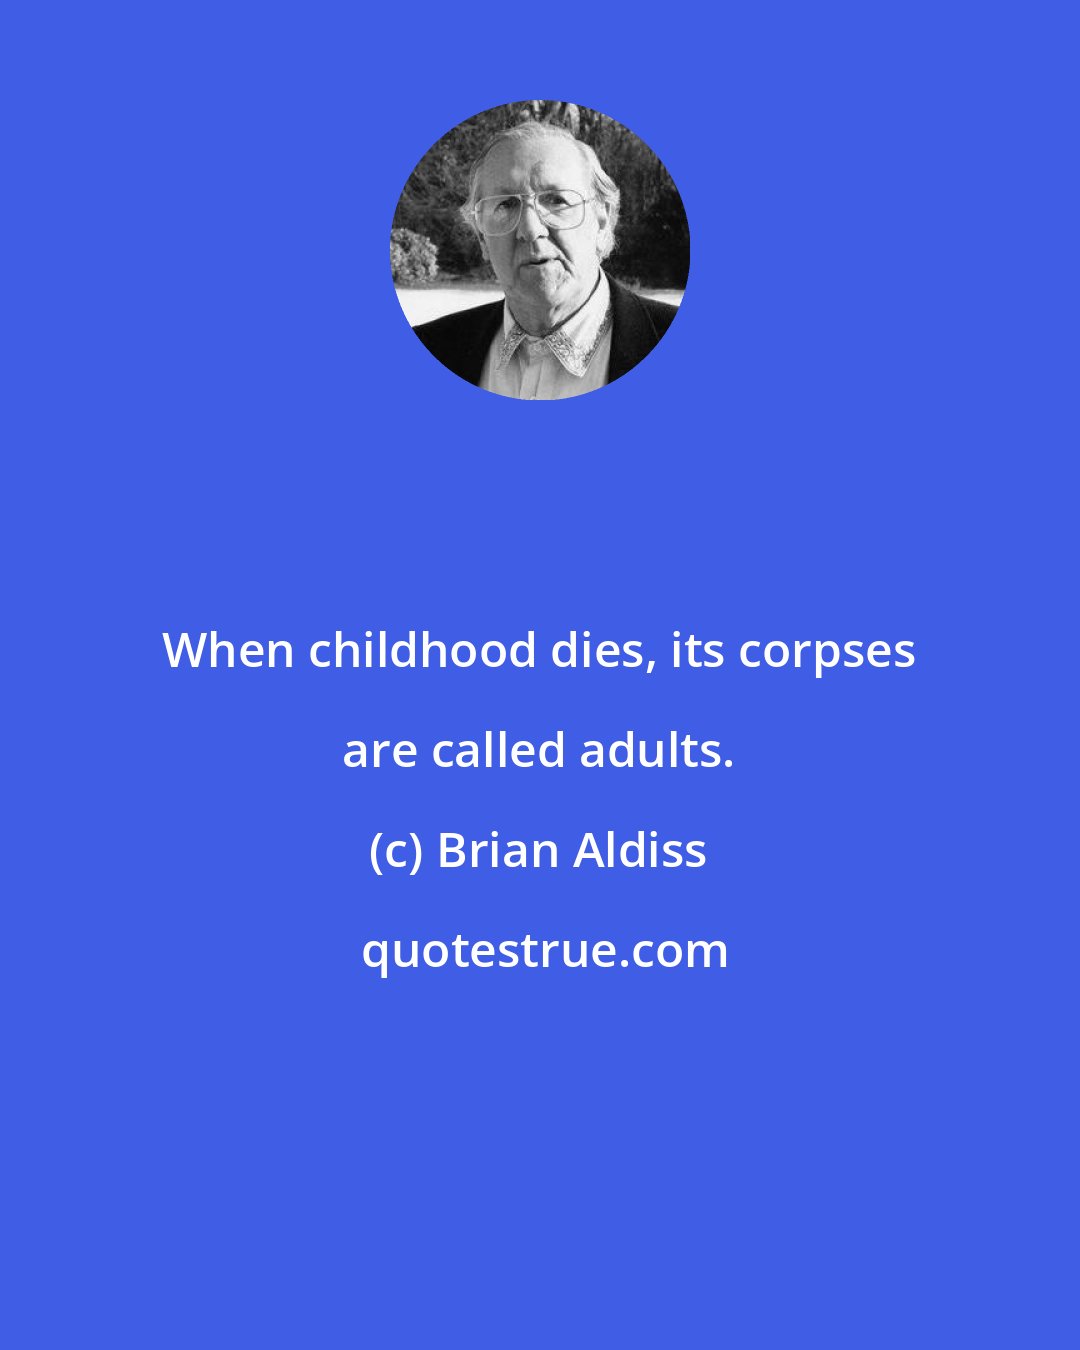 Brian Aldiss: When childhood dies, its corpses are called adults.